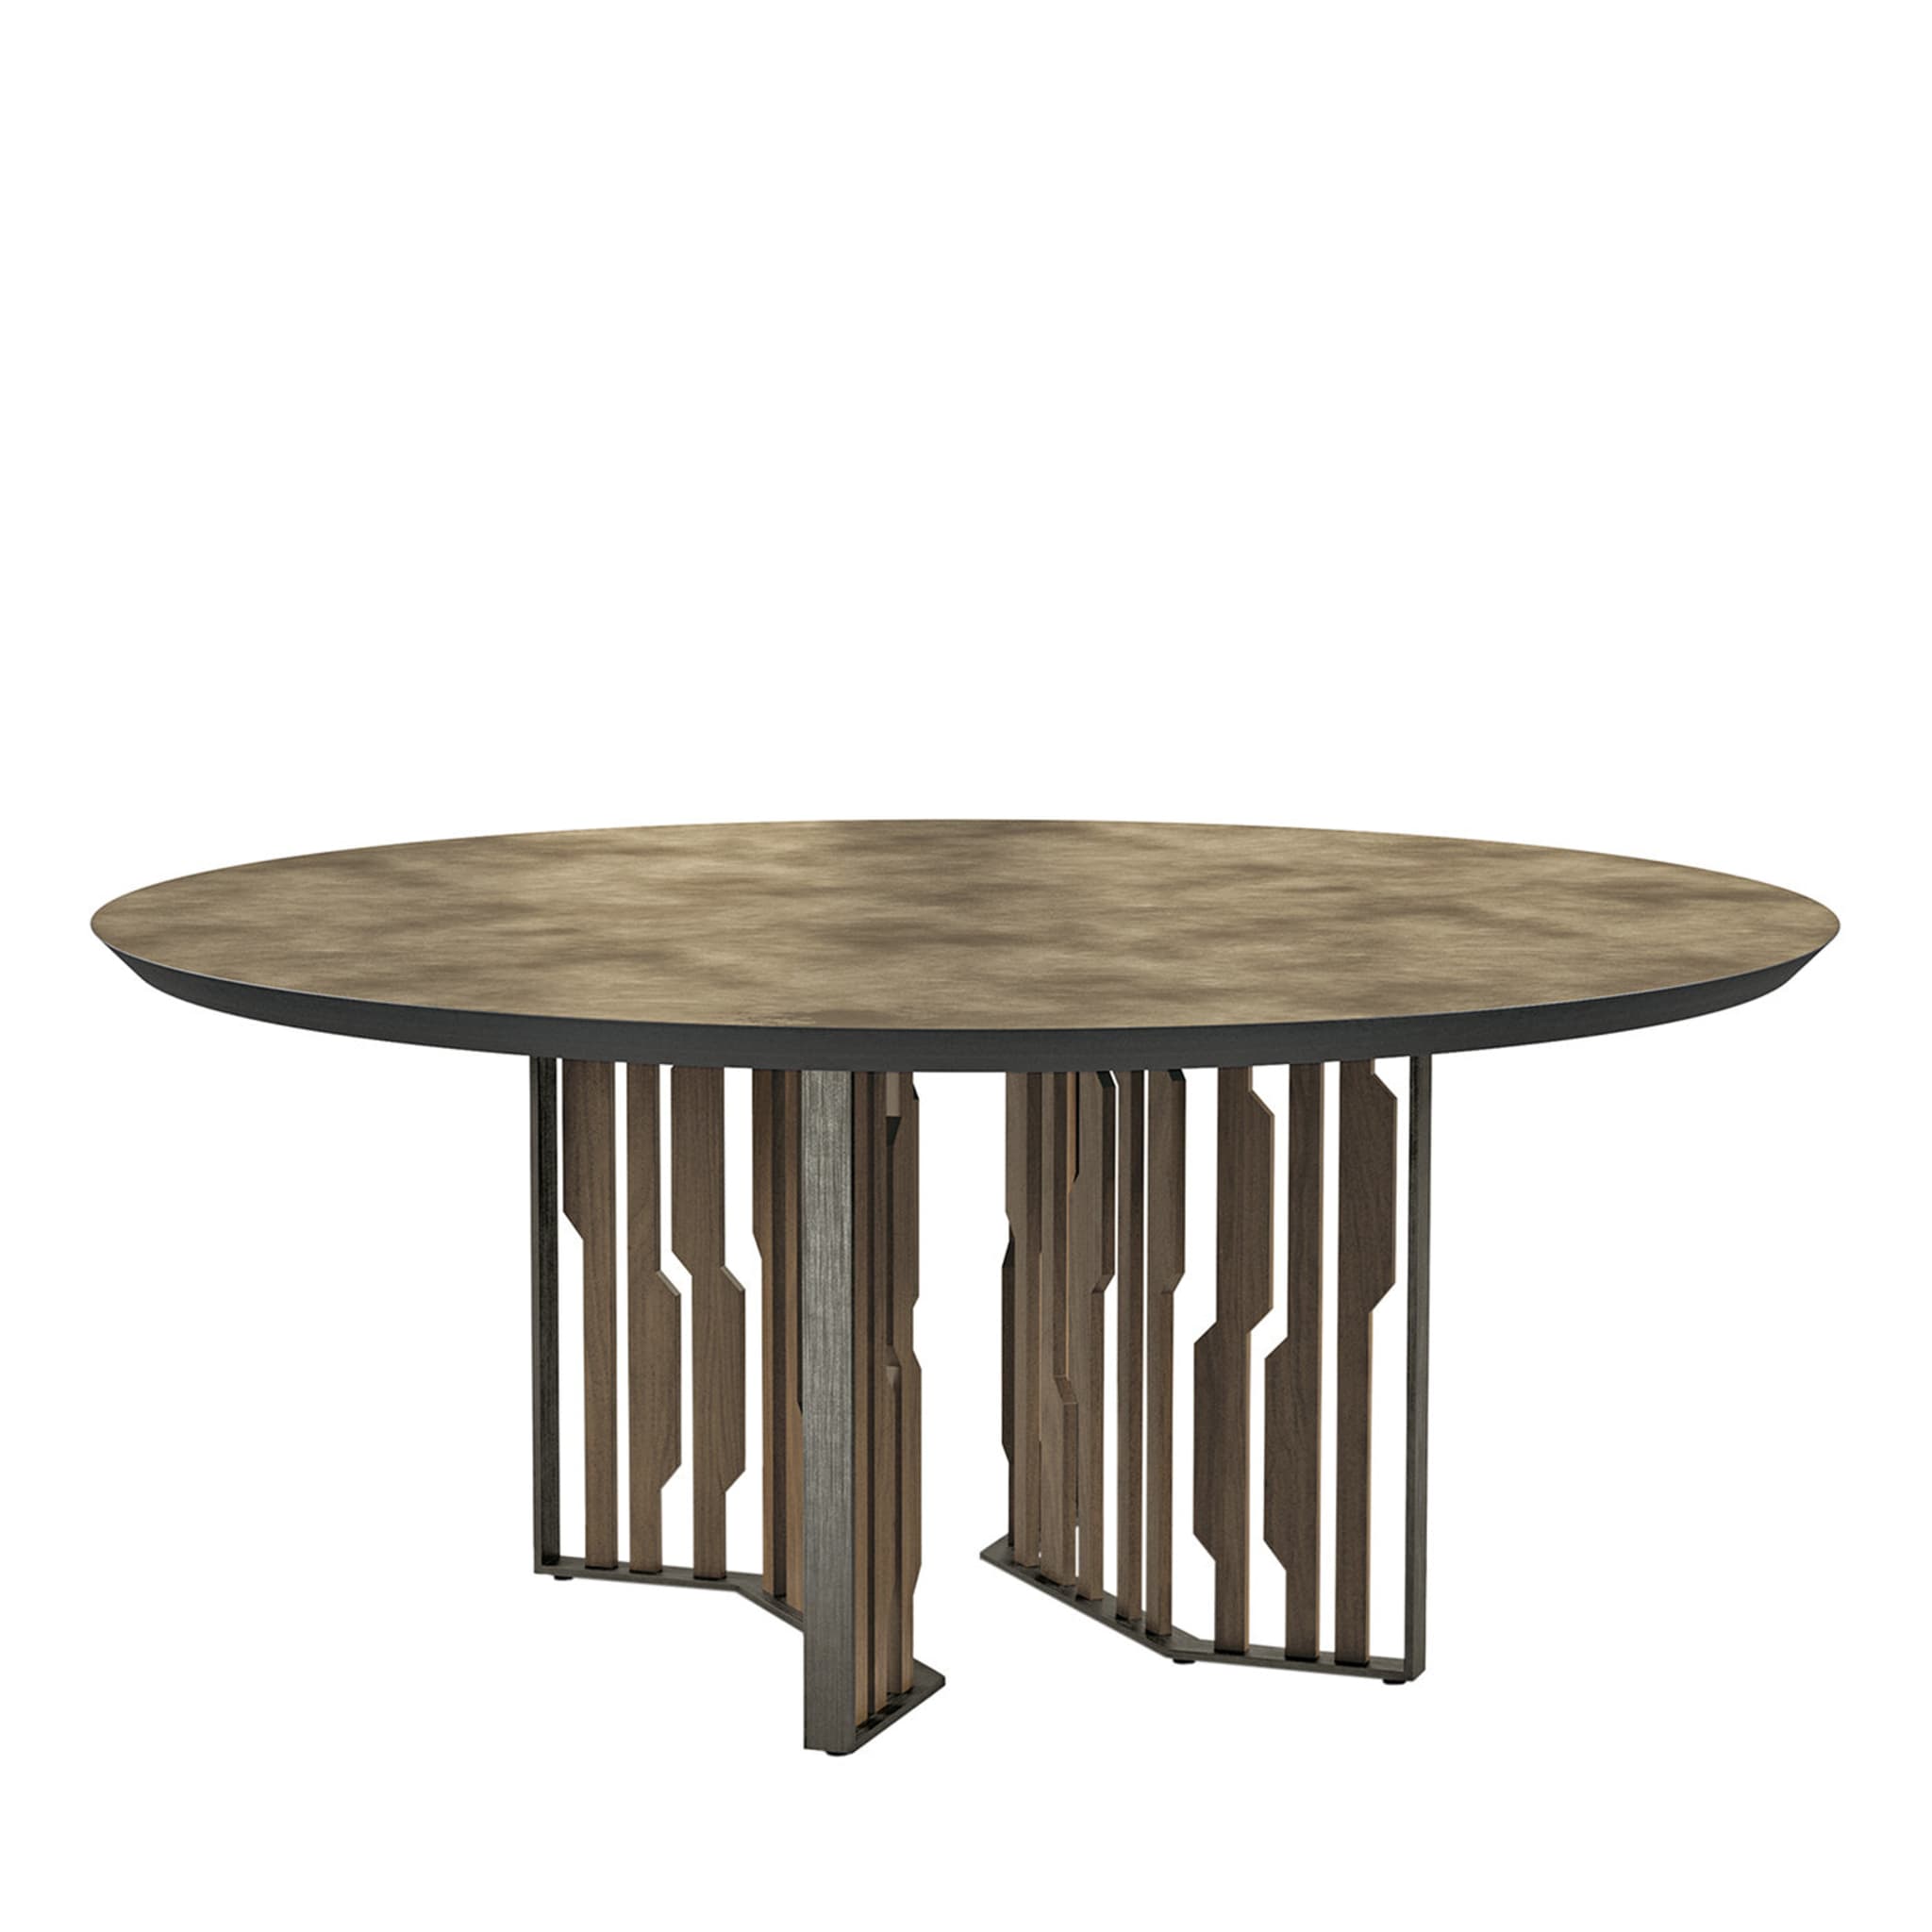 Bali R180 Dining Table - Main view